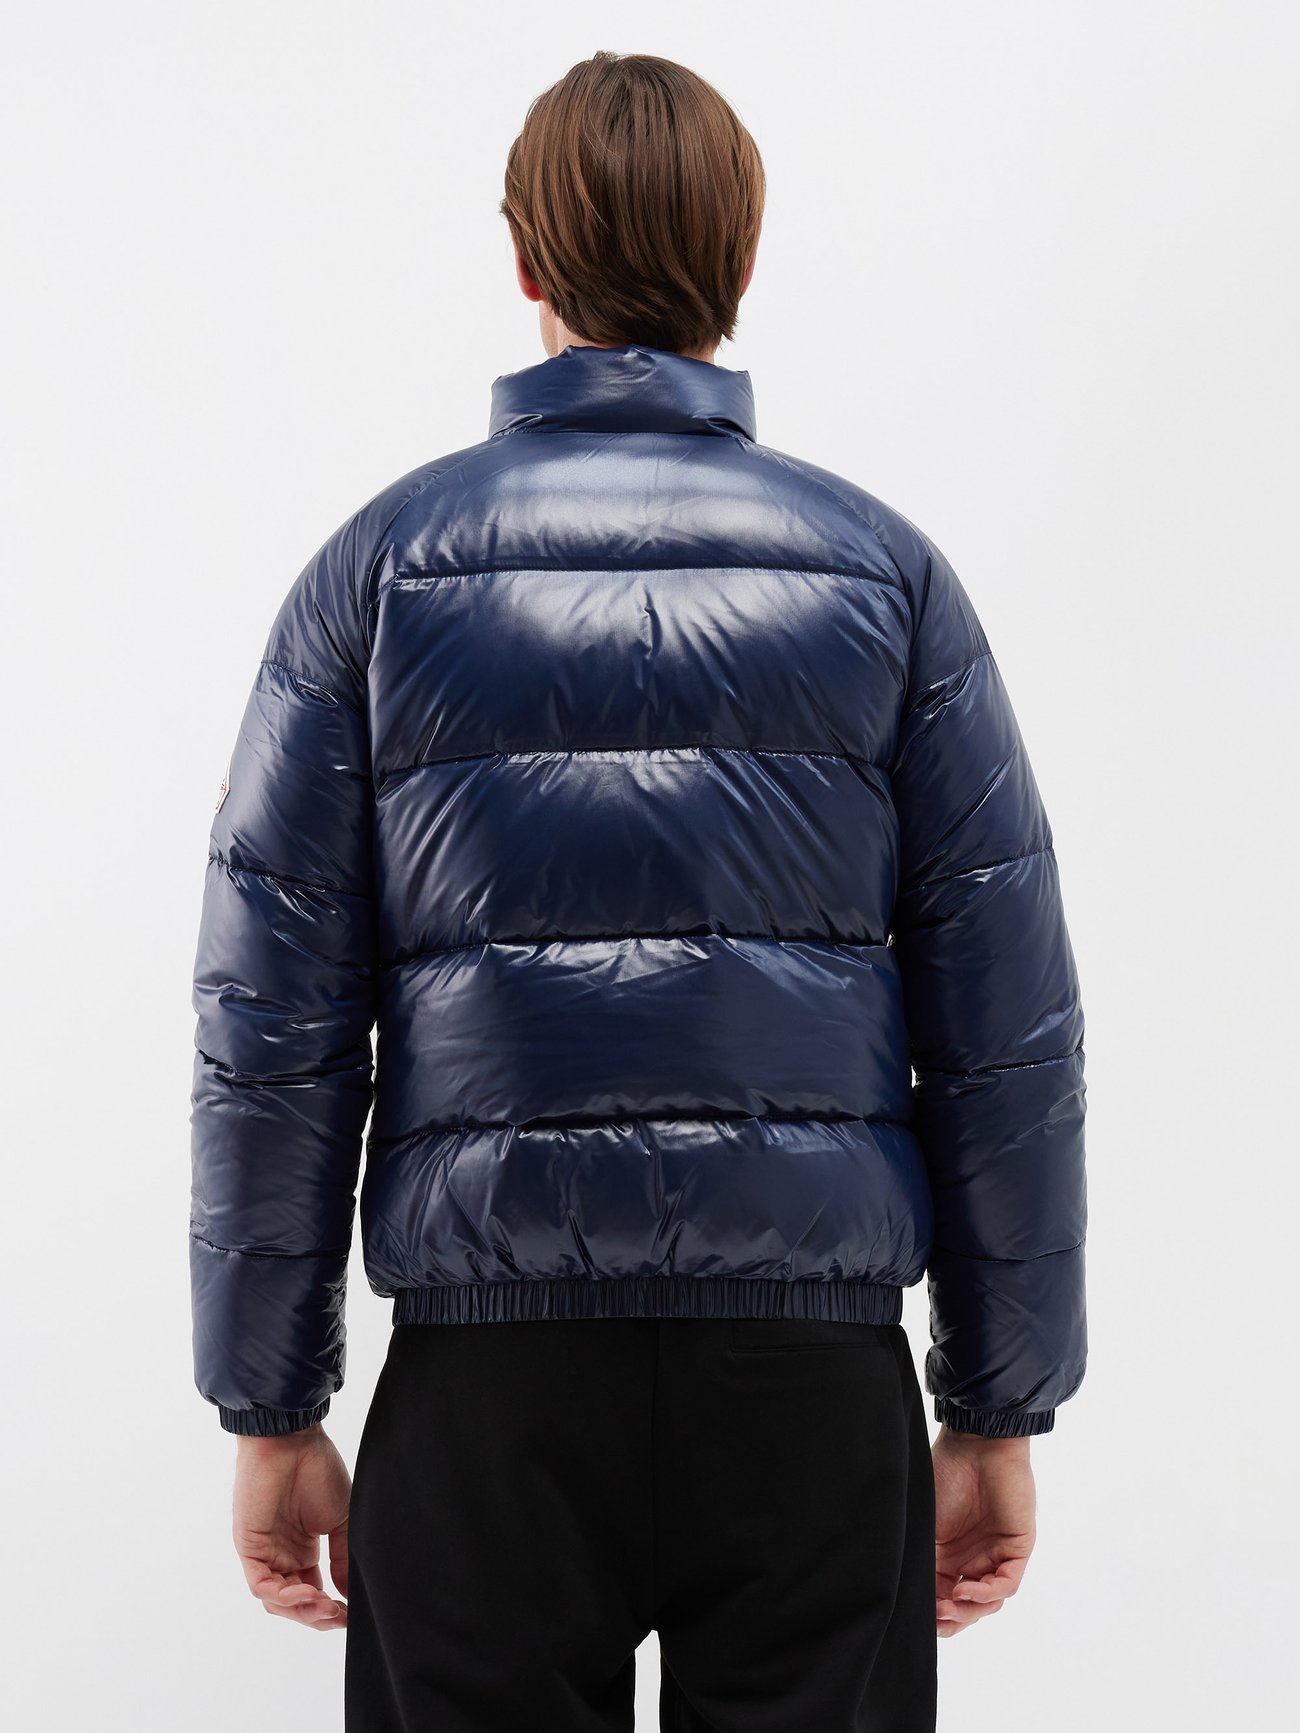 Vintage Mythic 2 quilted down jacket